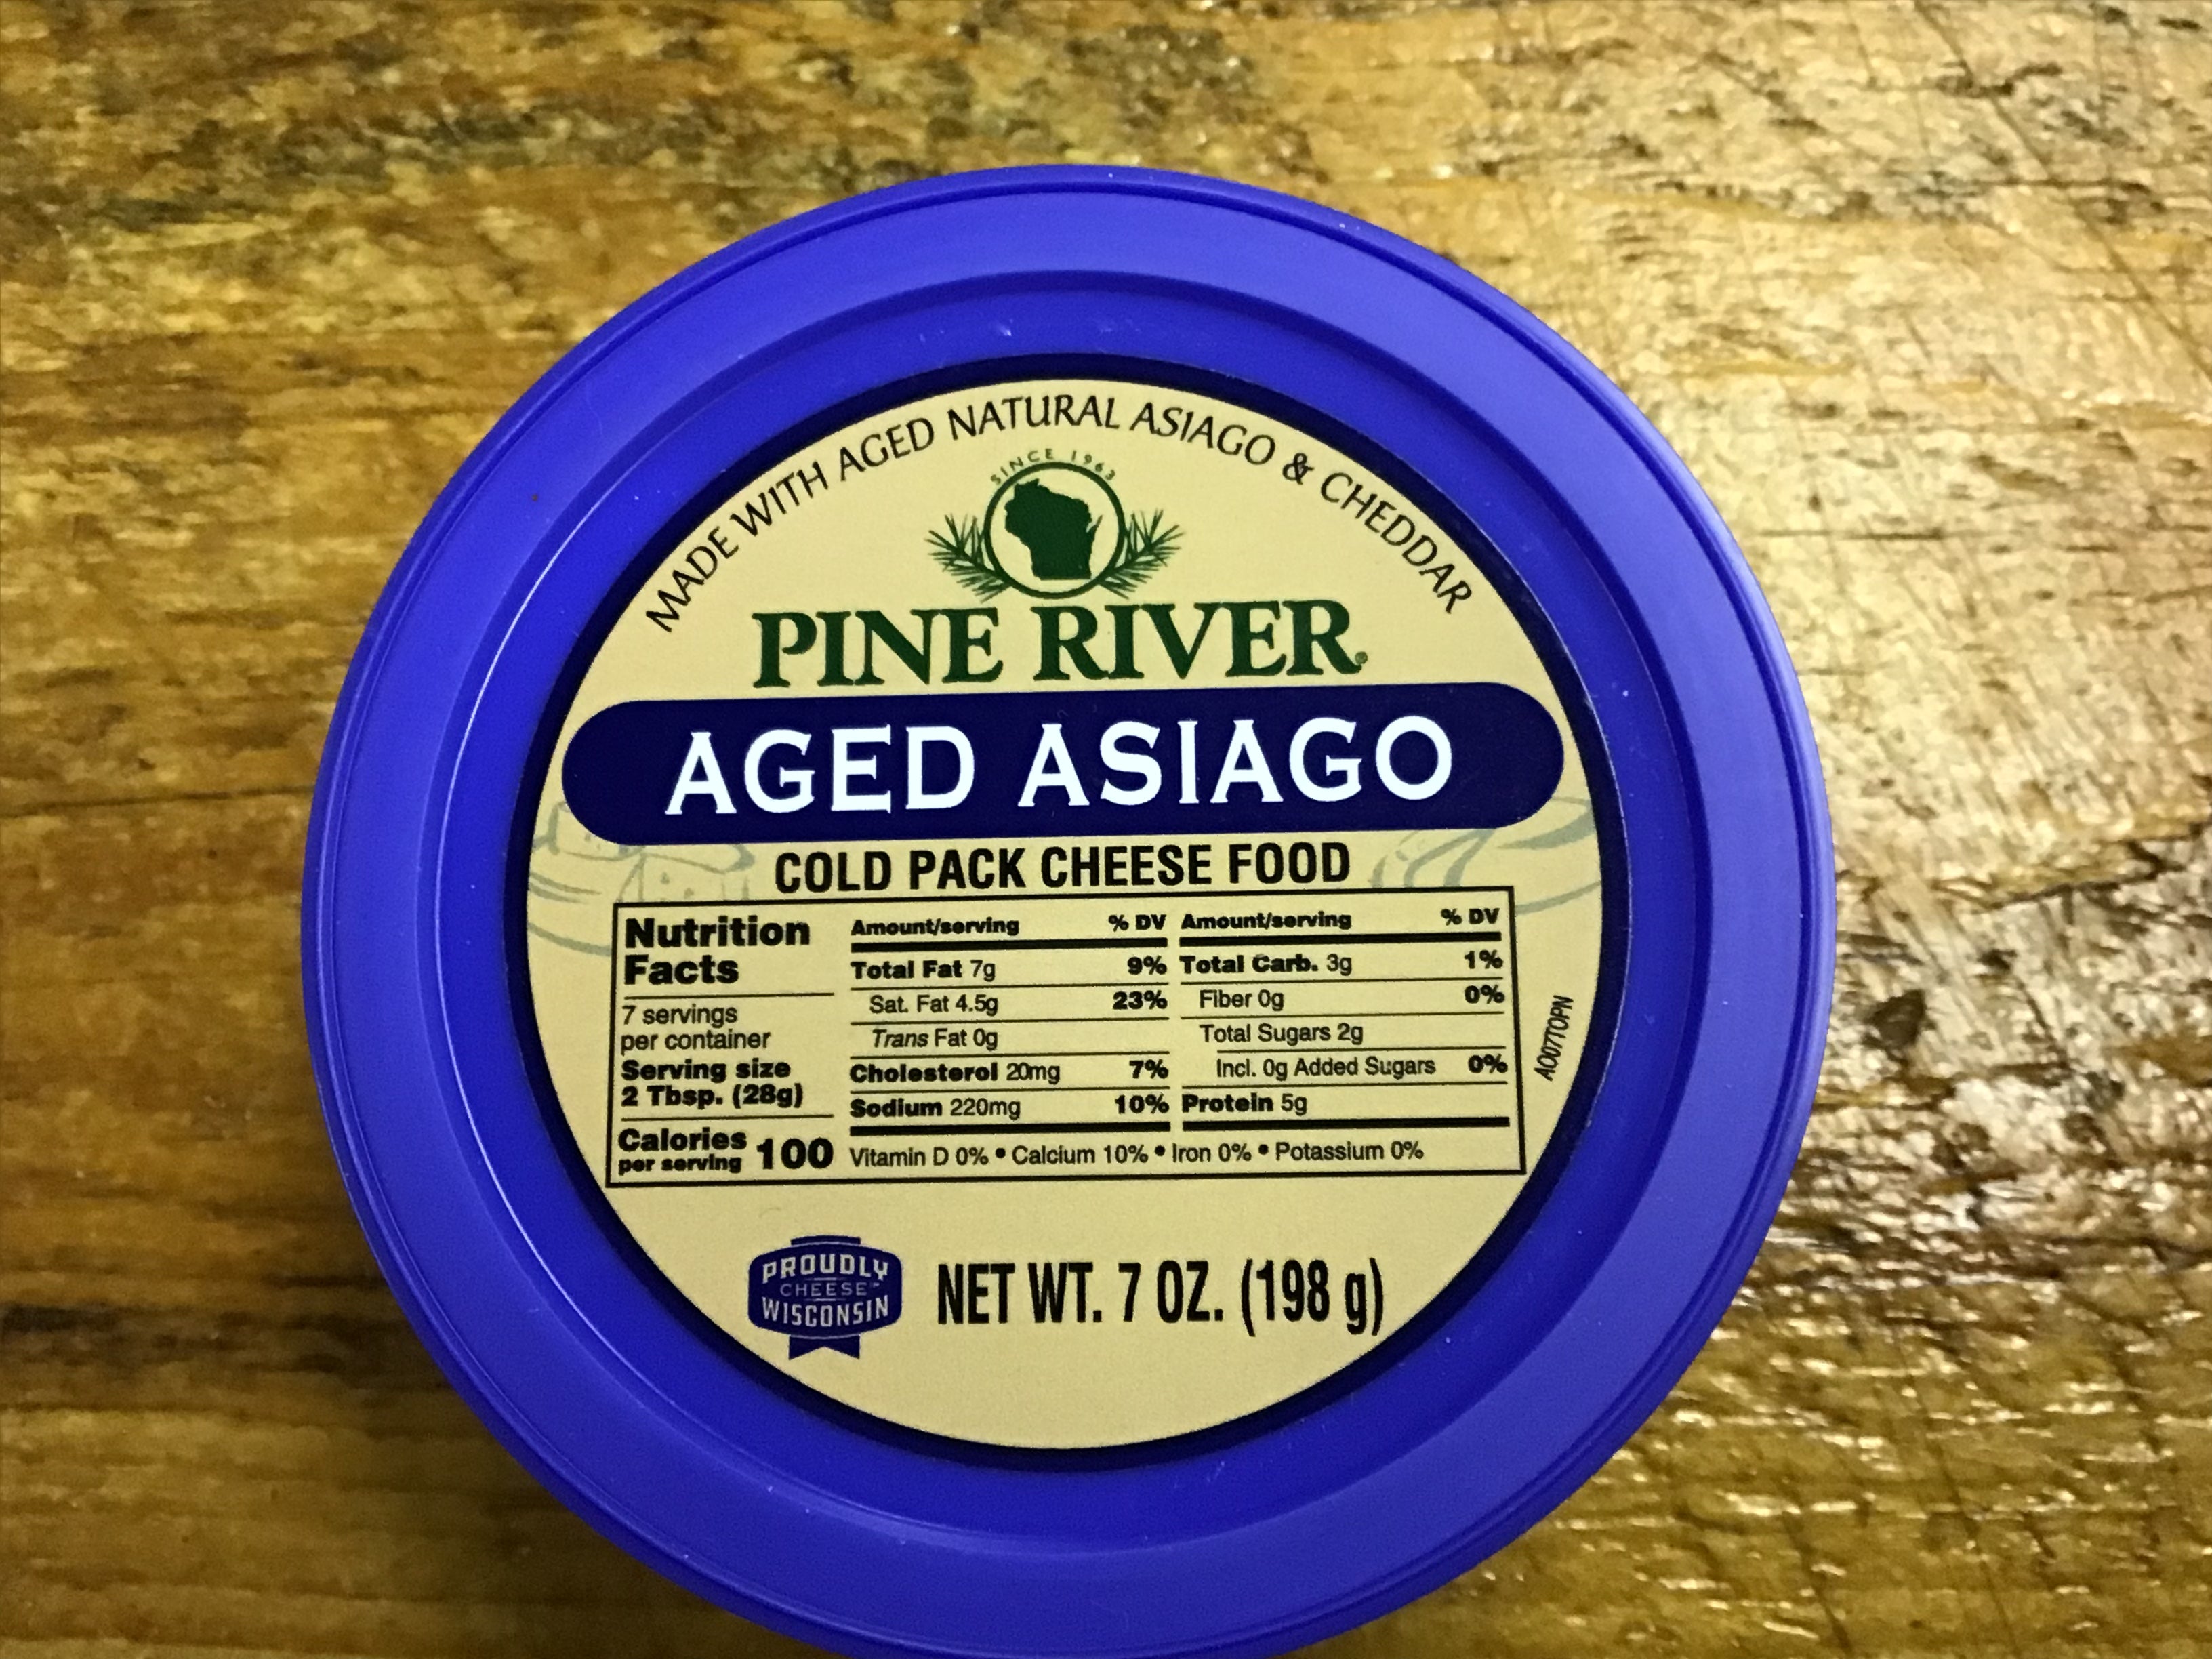 Aged Asiago - Pine River